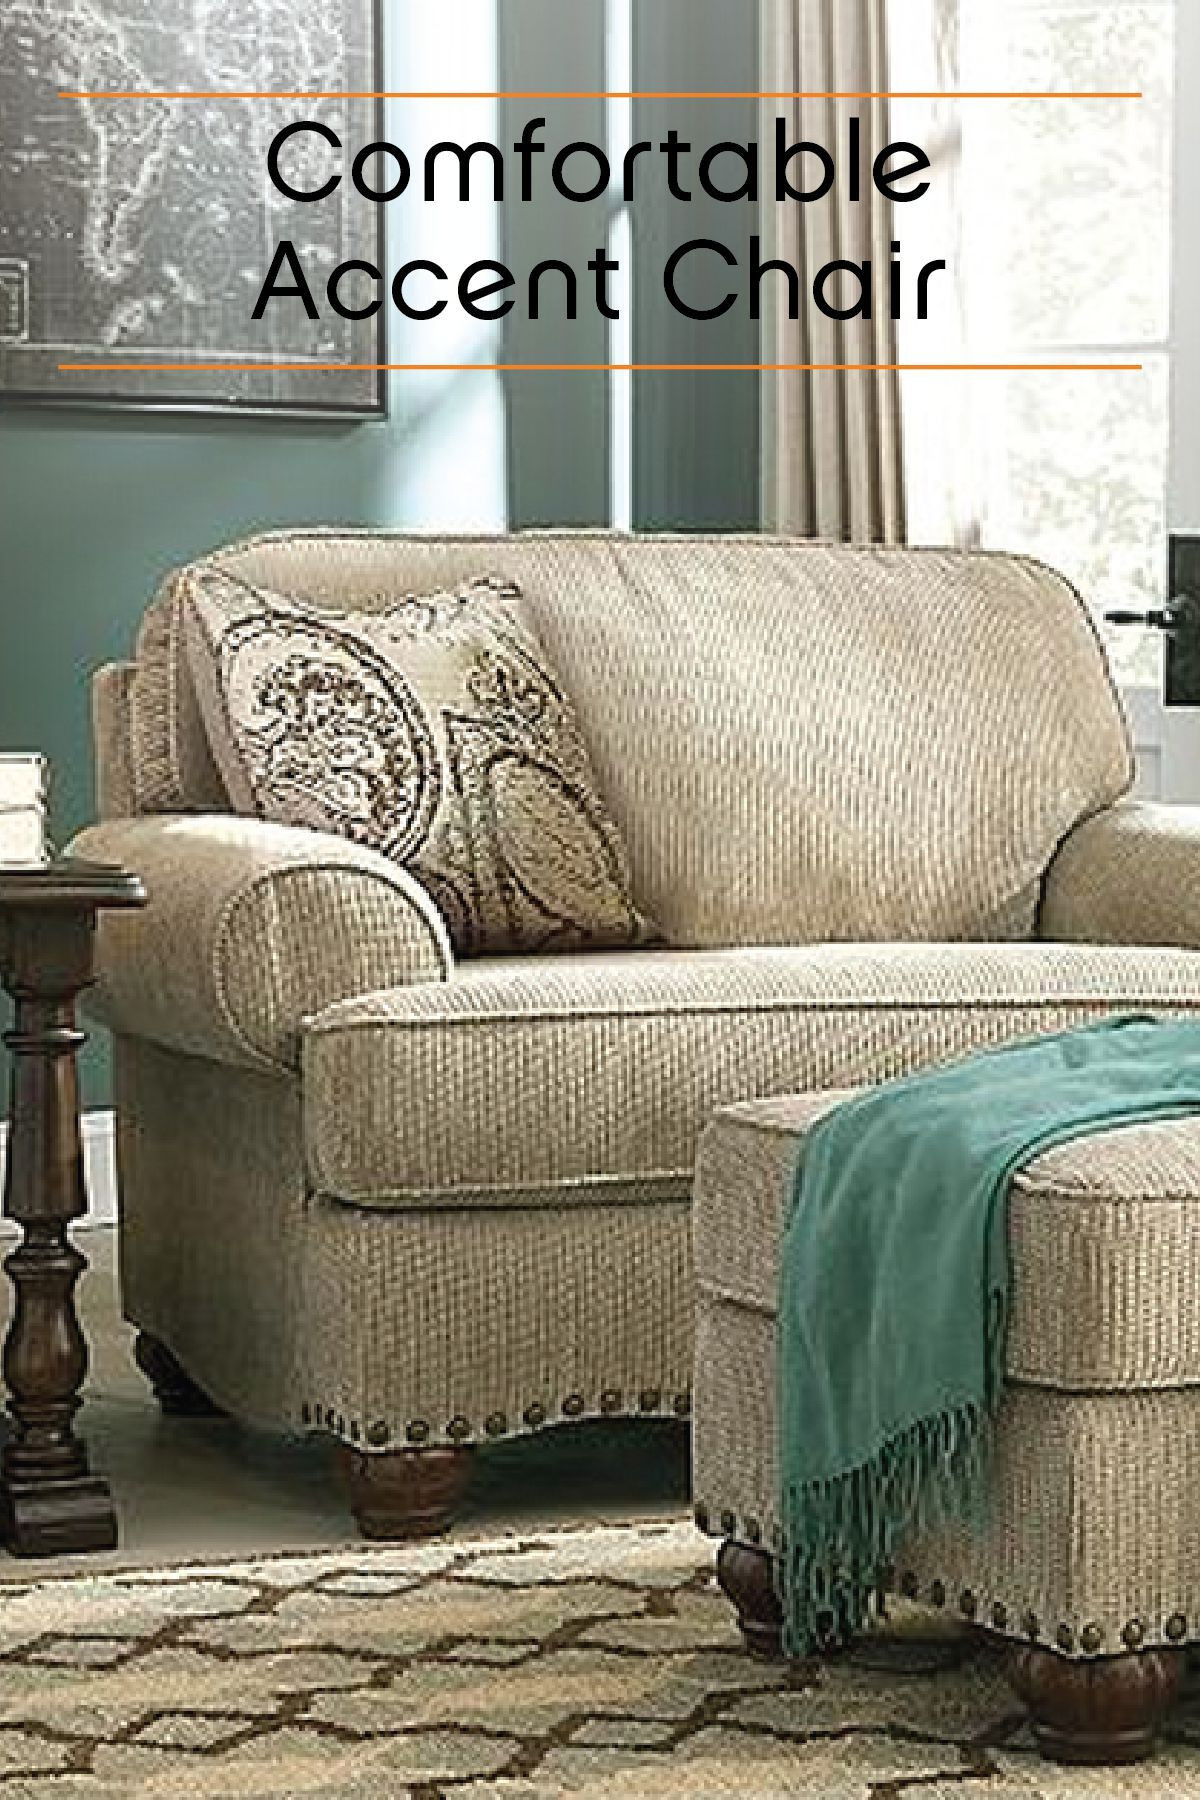 Oversized Chair For Living Room
 This oversized accent chair is a roomy and stylish way to